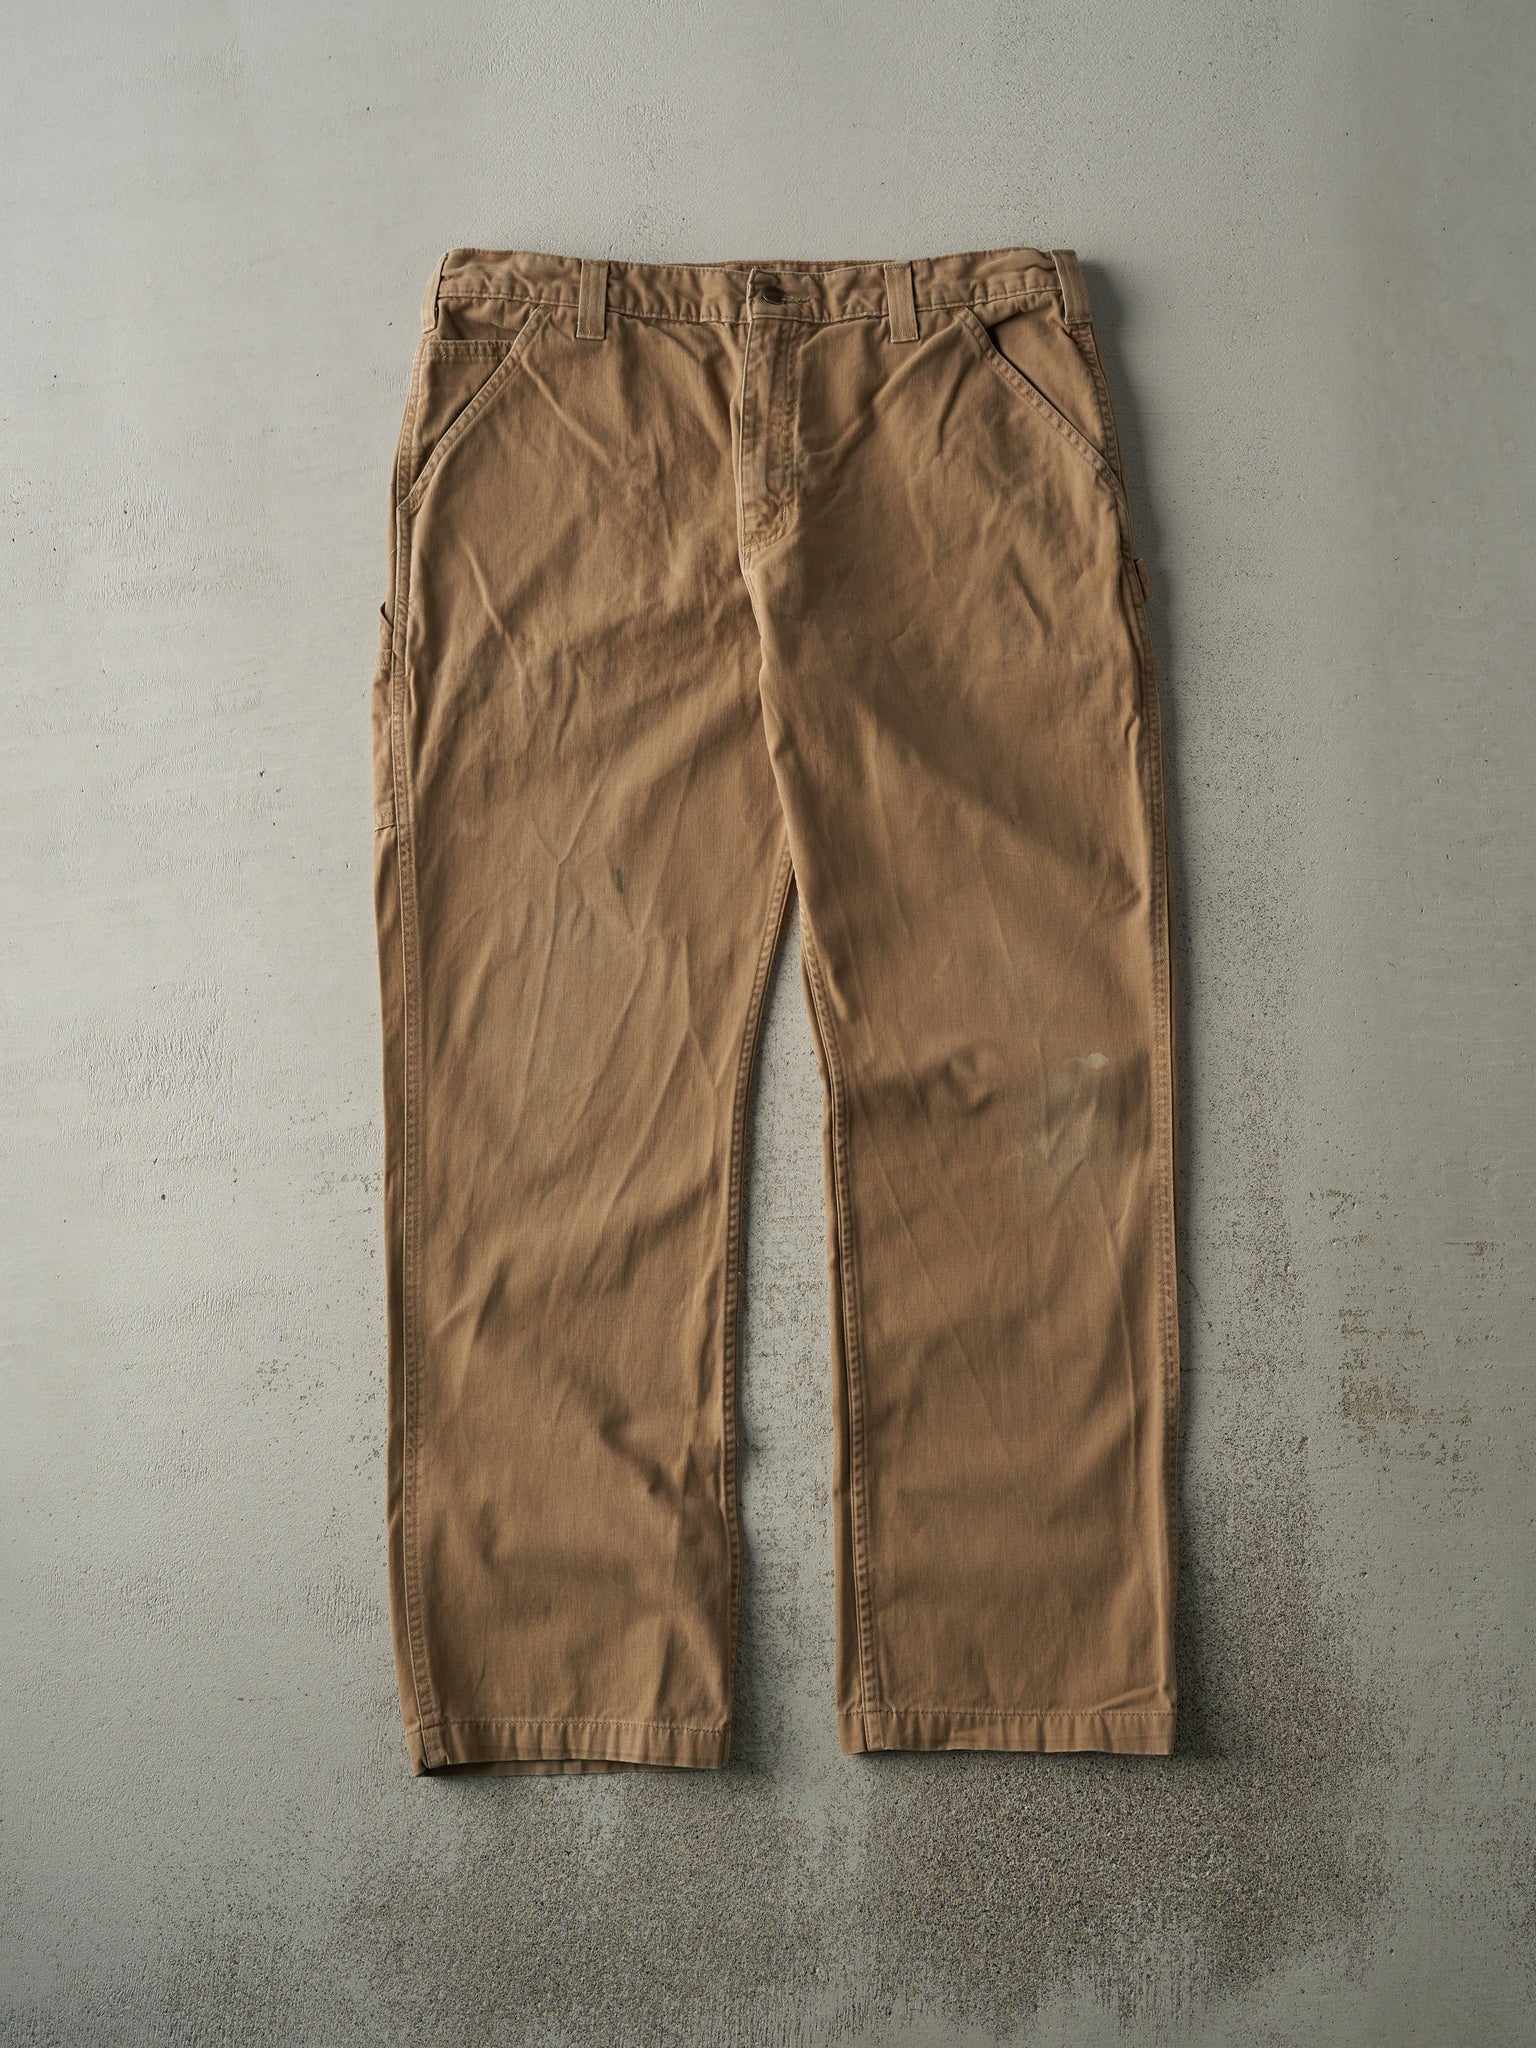 Vintage Y2K Camel Relaxed Fit Carhartt Light Weight Carpenter Pants (37x31.5)